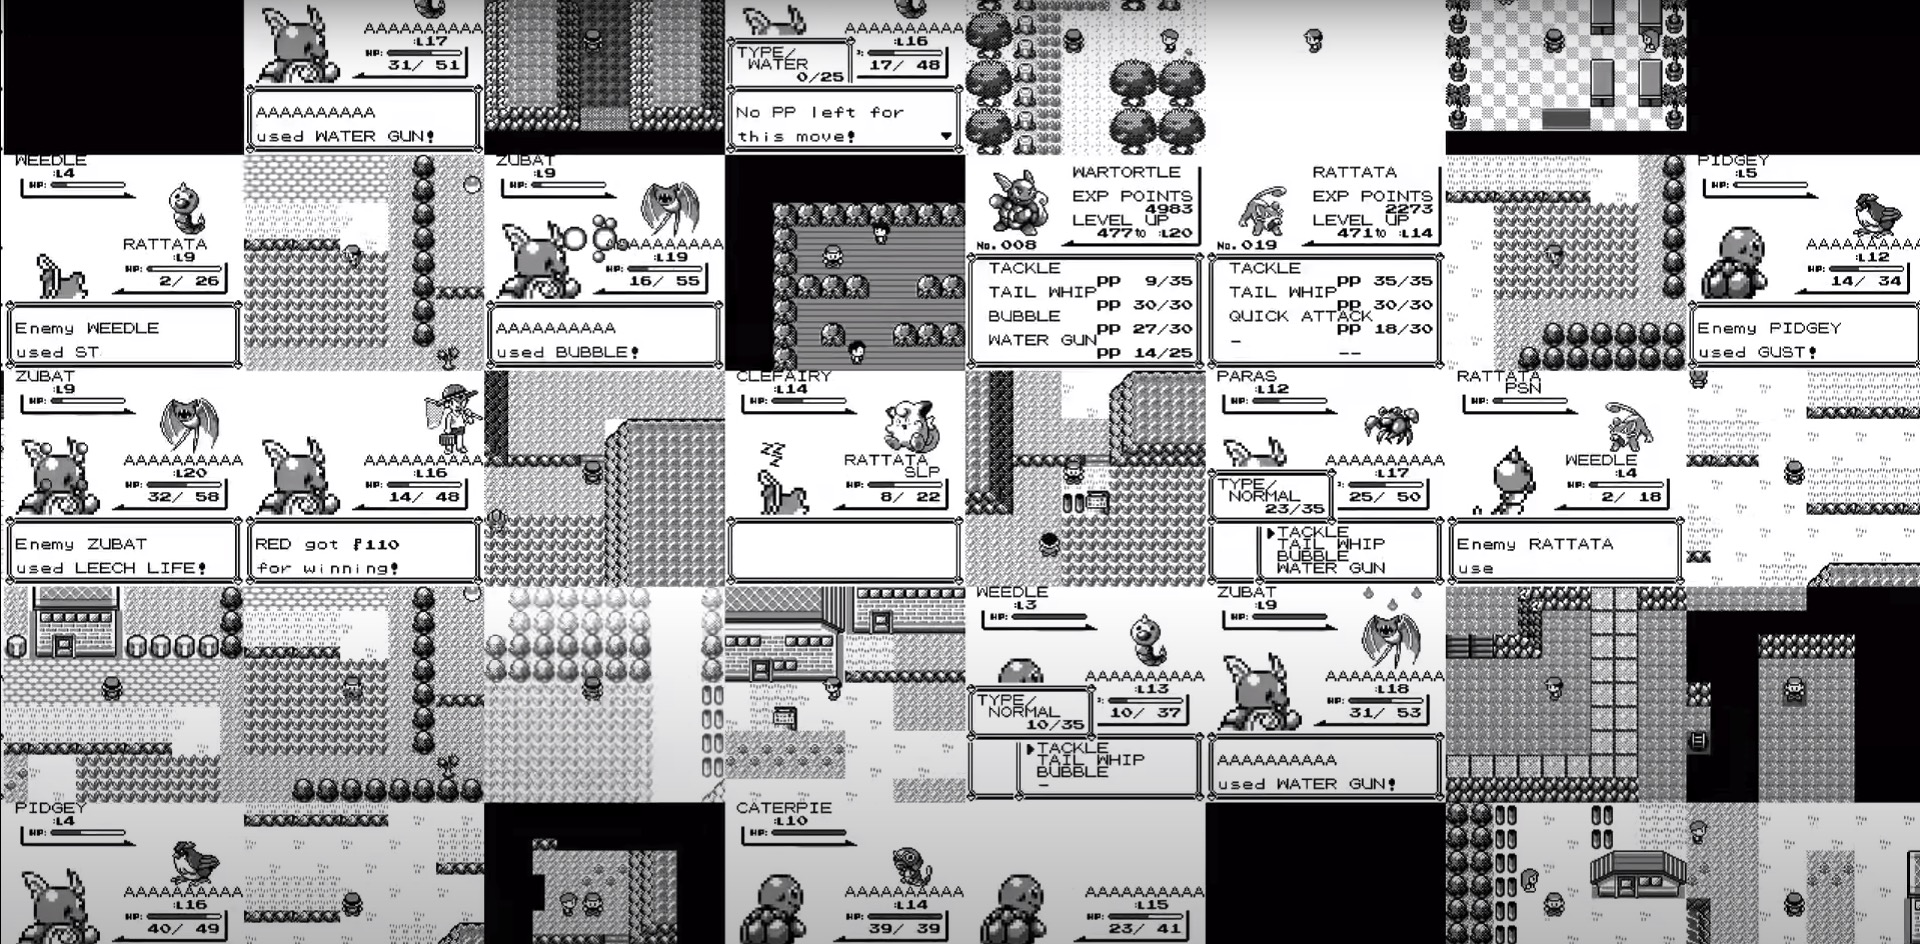 Playing Pokémon Red with Reinforcement Learning